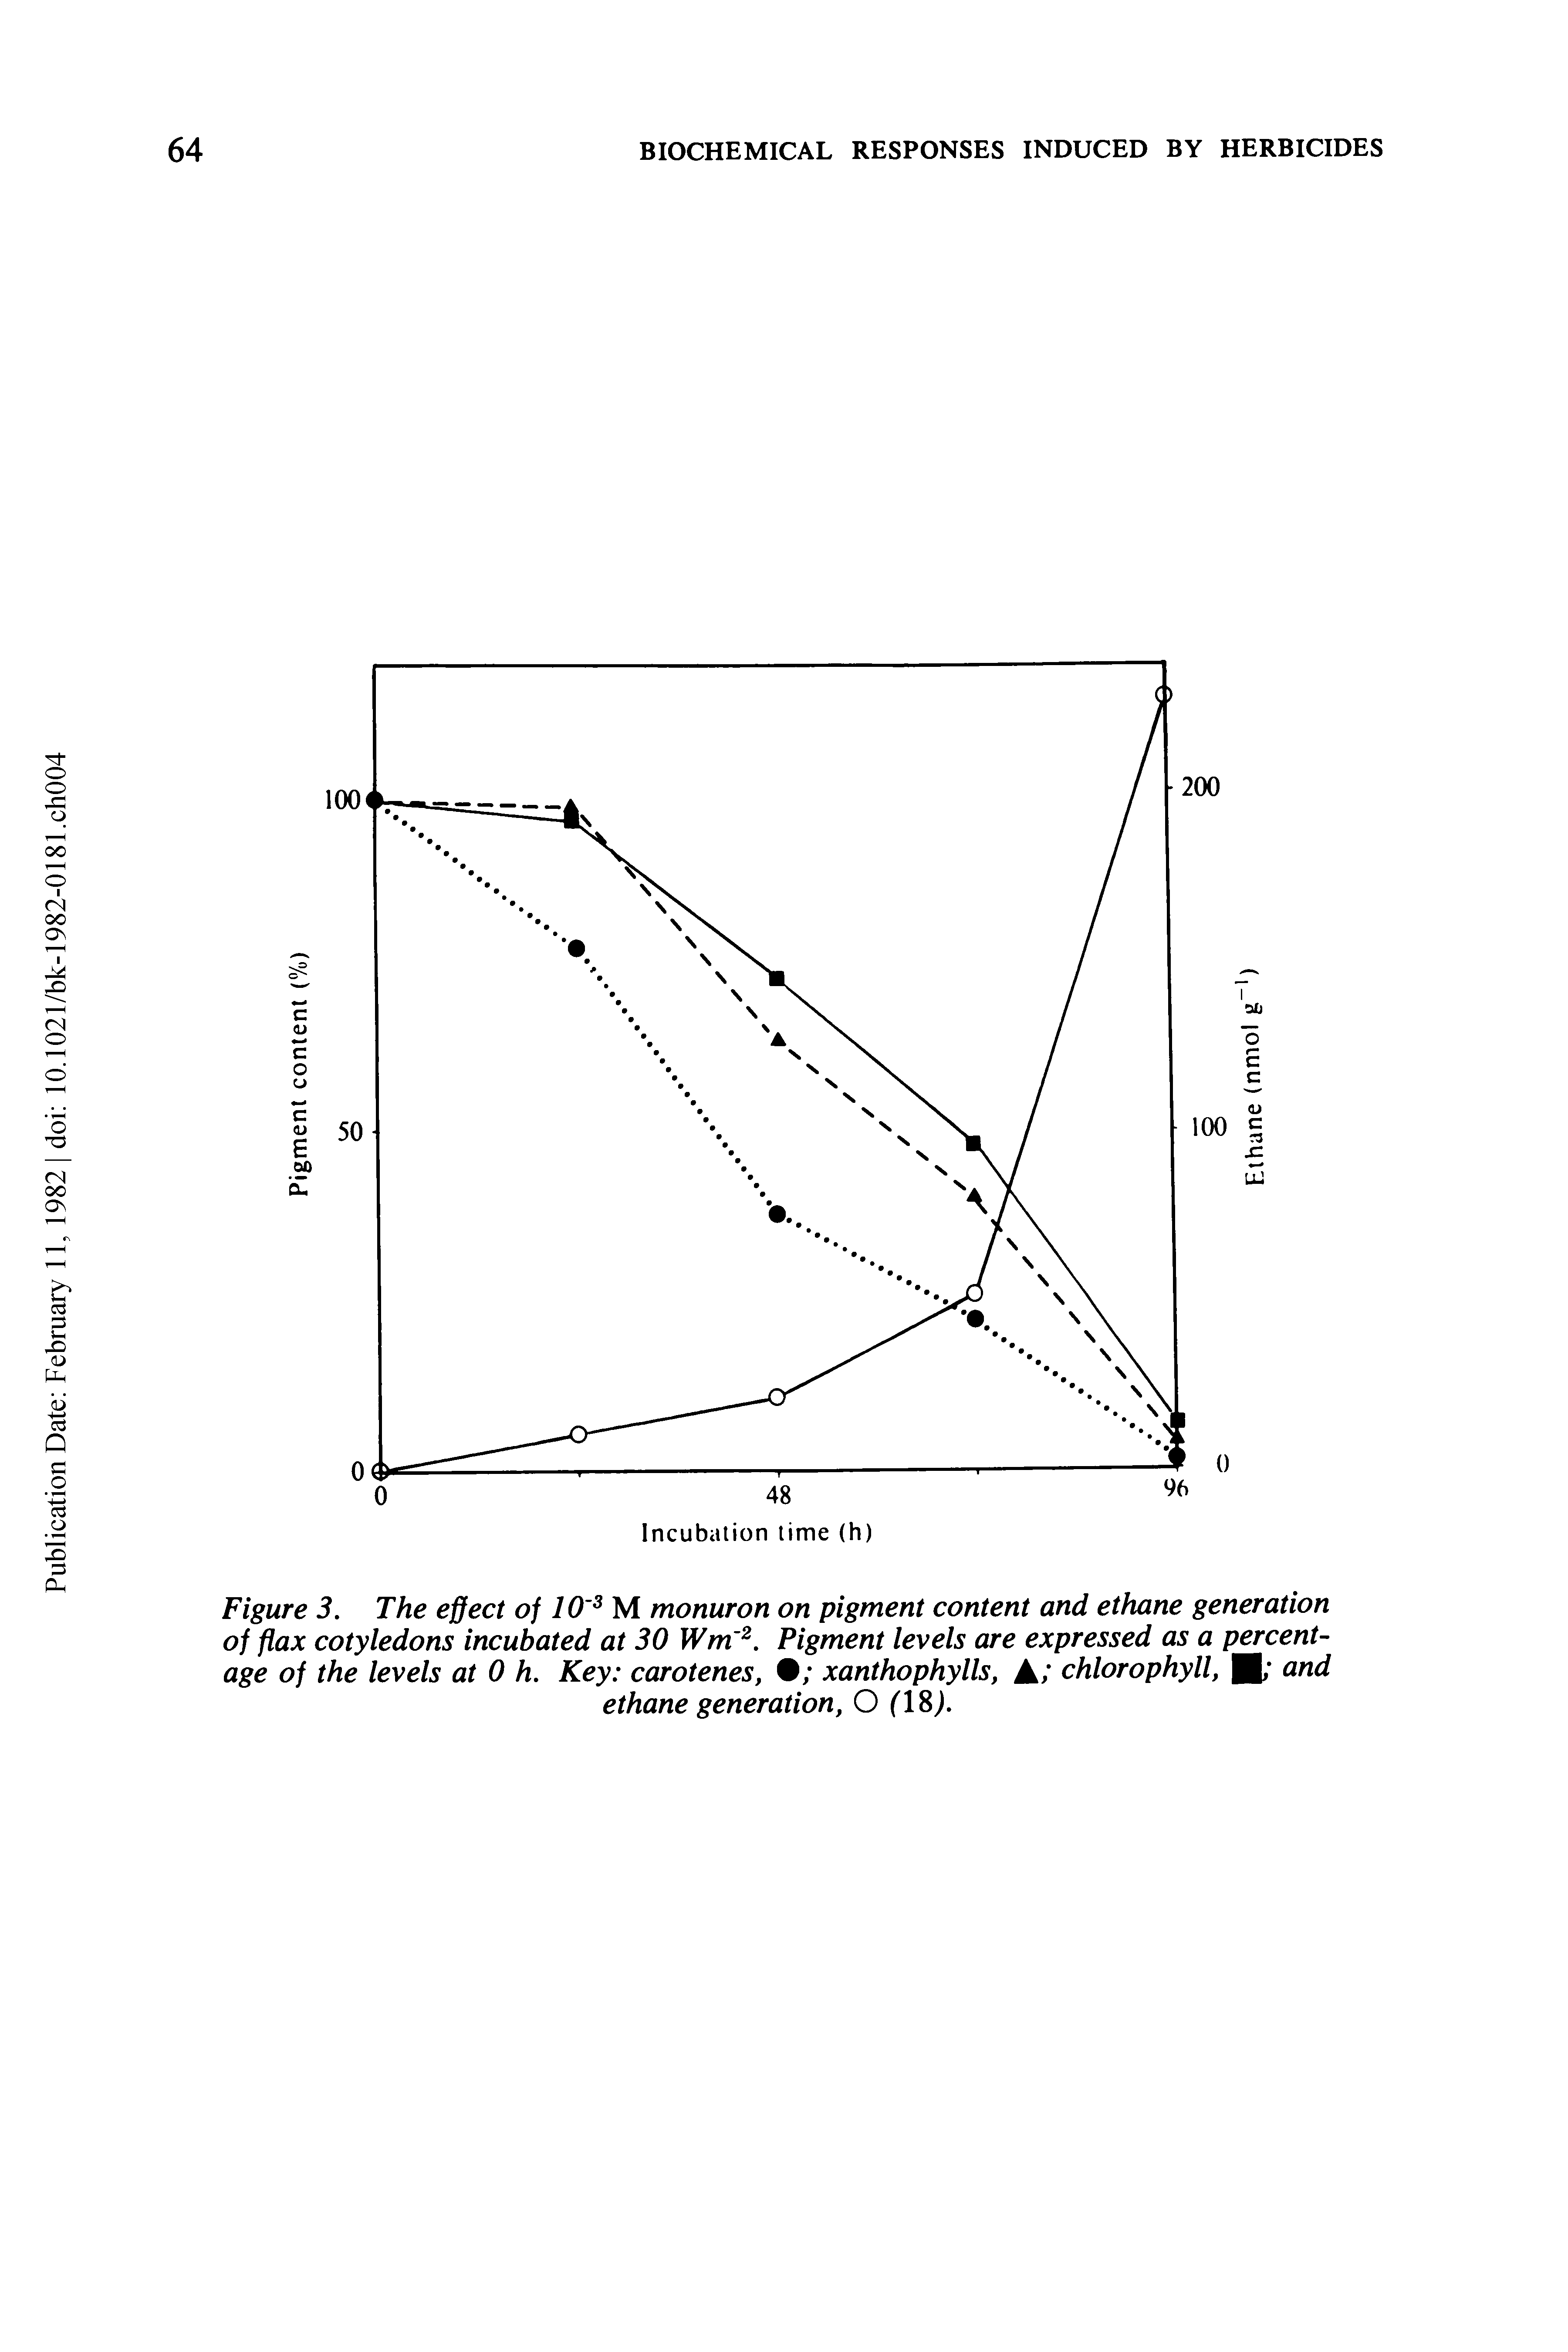 Figure 3. The effect of 10 M monuron on pigment content and ethane generation of flax cotyledons incubated at 30 Wm. Pigment levels are expressed as a percentage of the levels at 0 h. Key carotenes, xanthophylls, A/ chlorophyll, B, and ethane generation, O ( %).